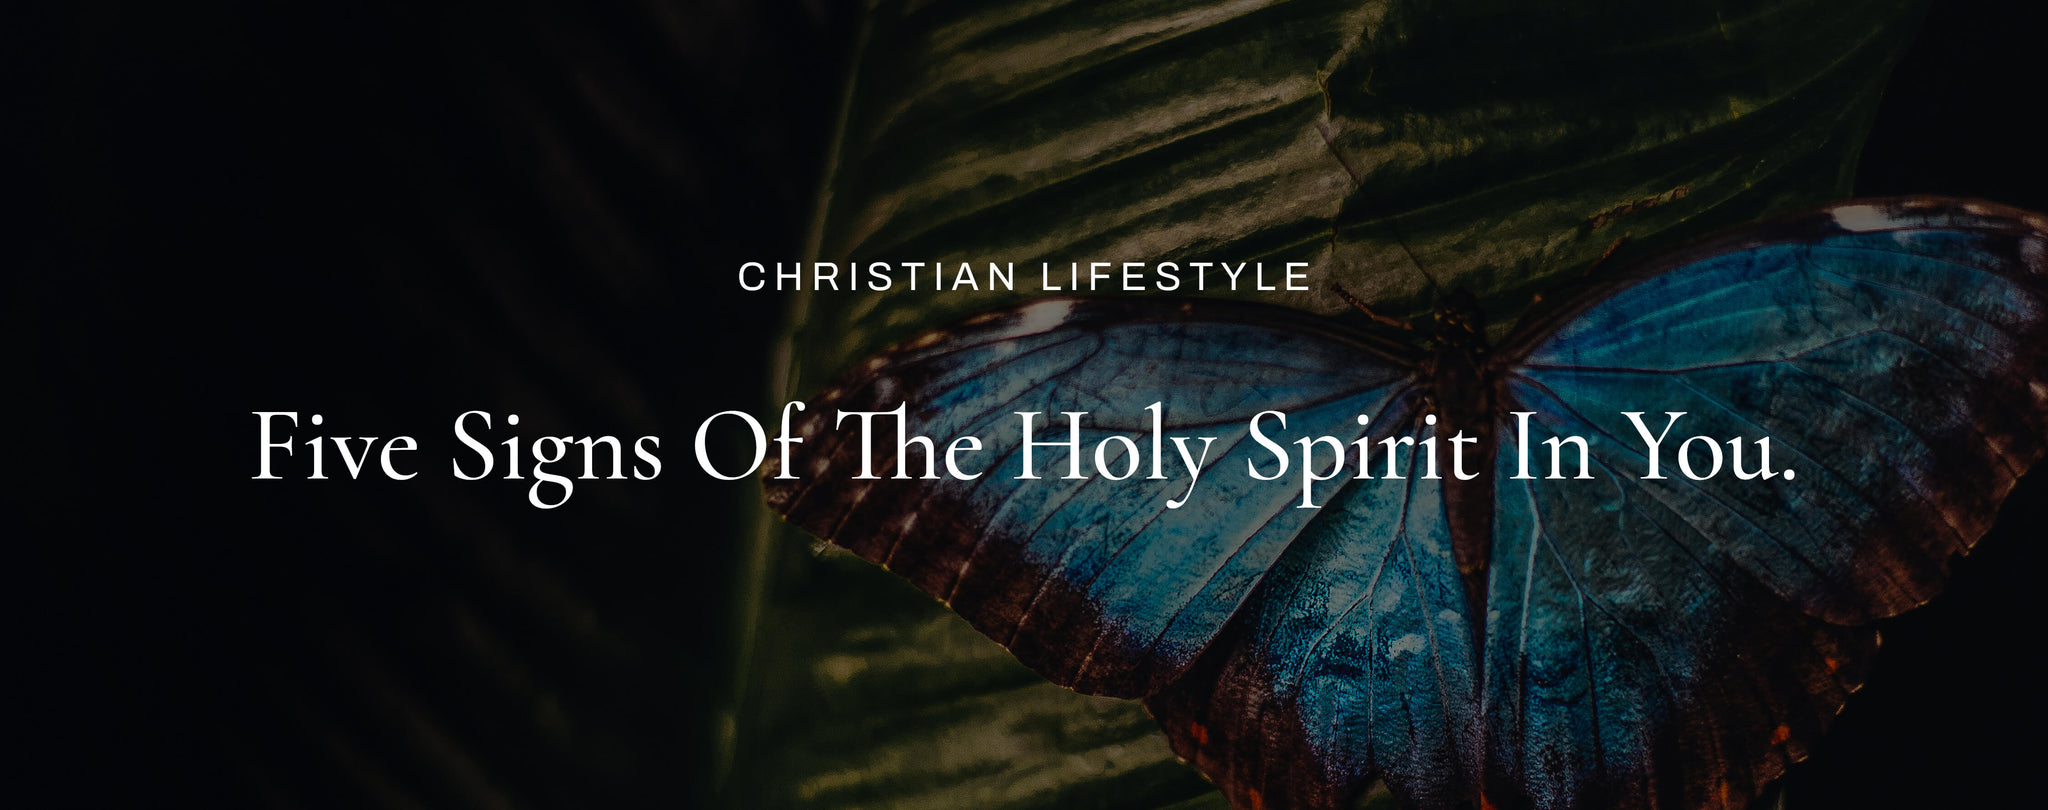 Signs of the Holy Spirit in You